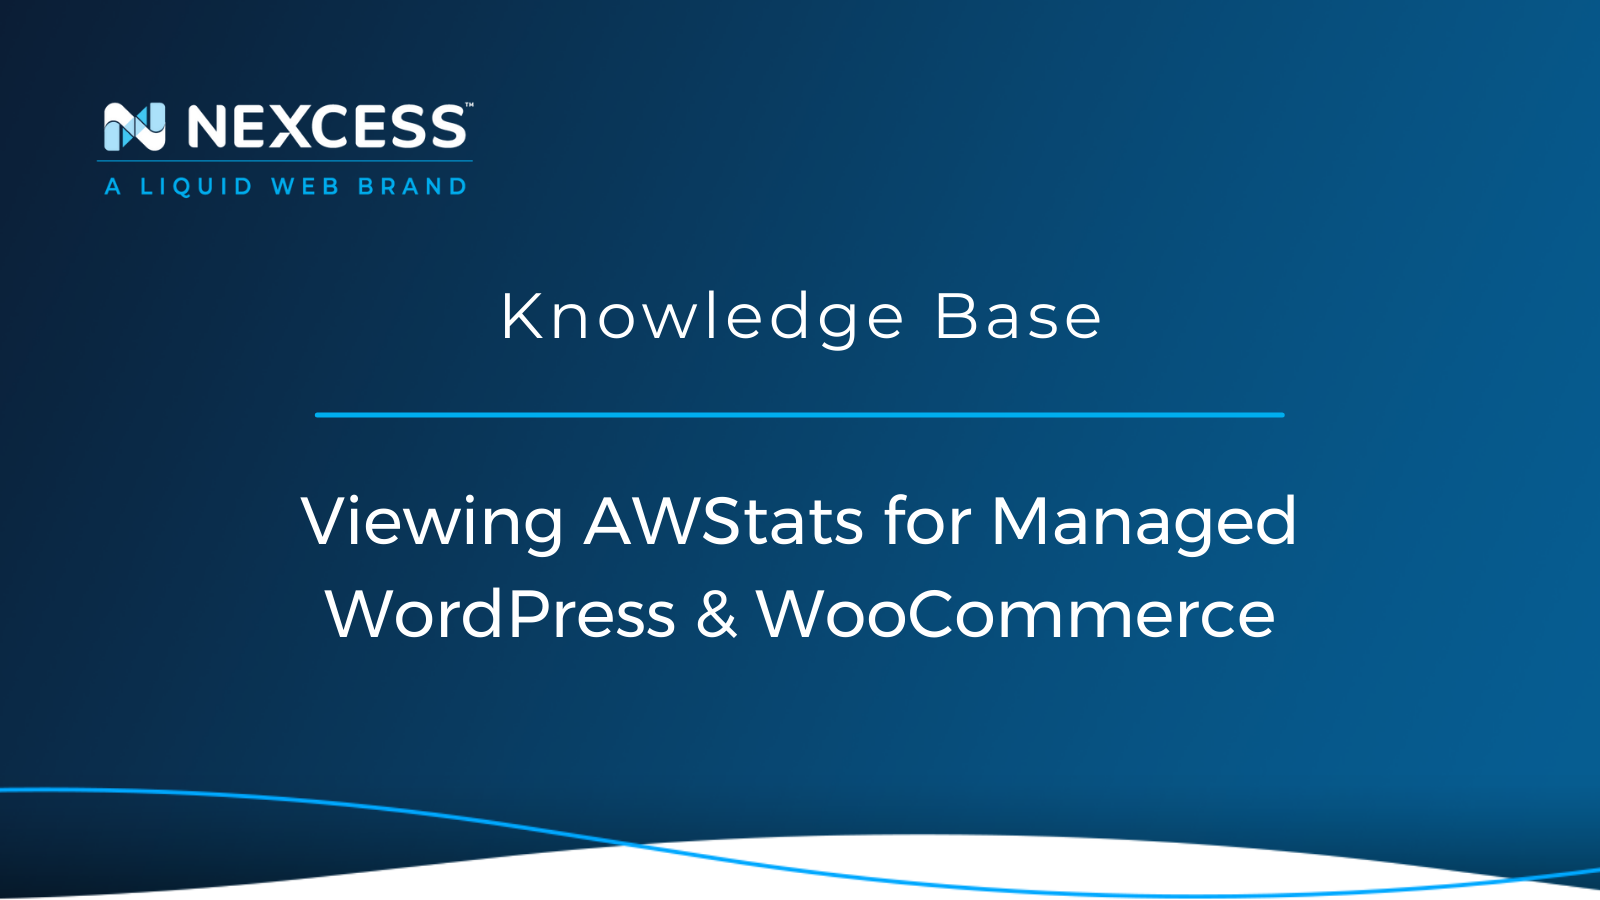 Viewing AWStats for Managed WordPress & WooCommerce